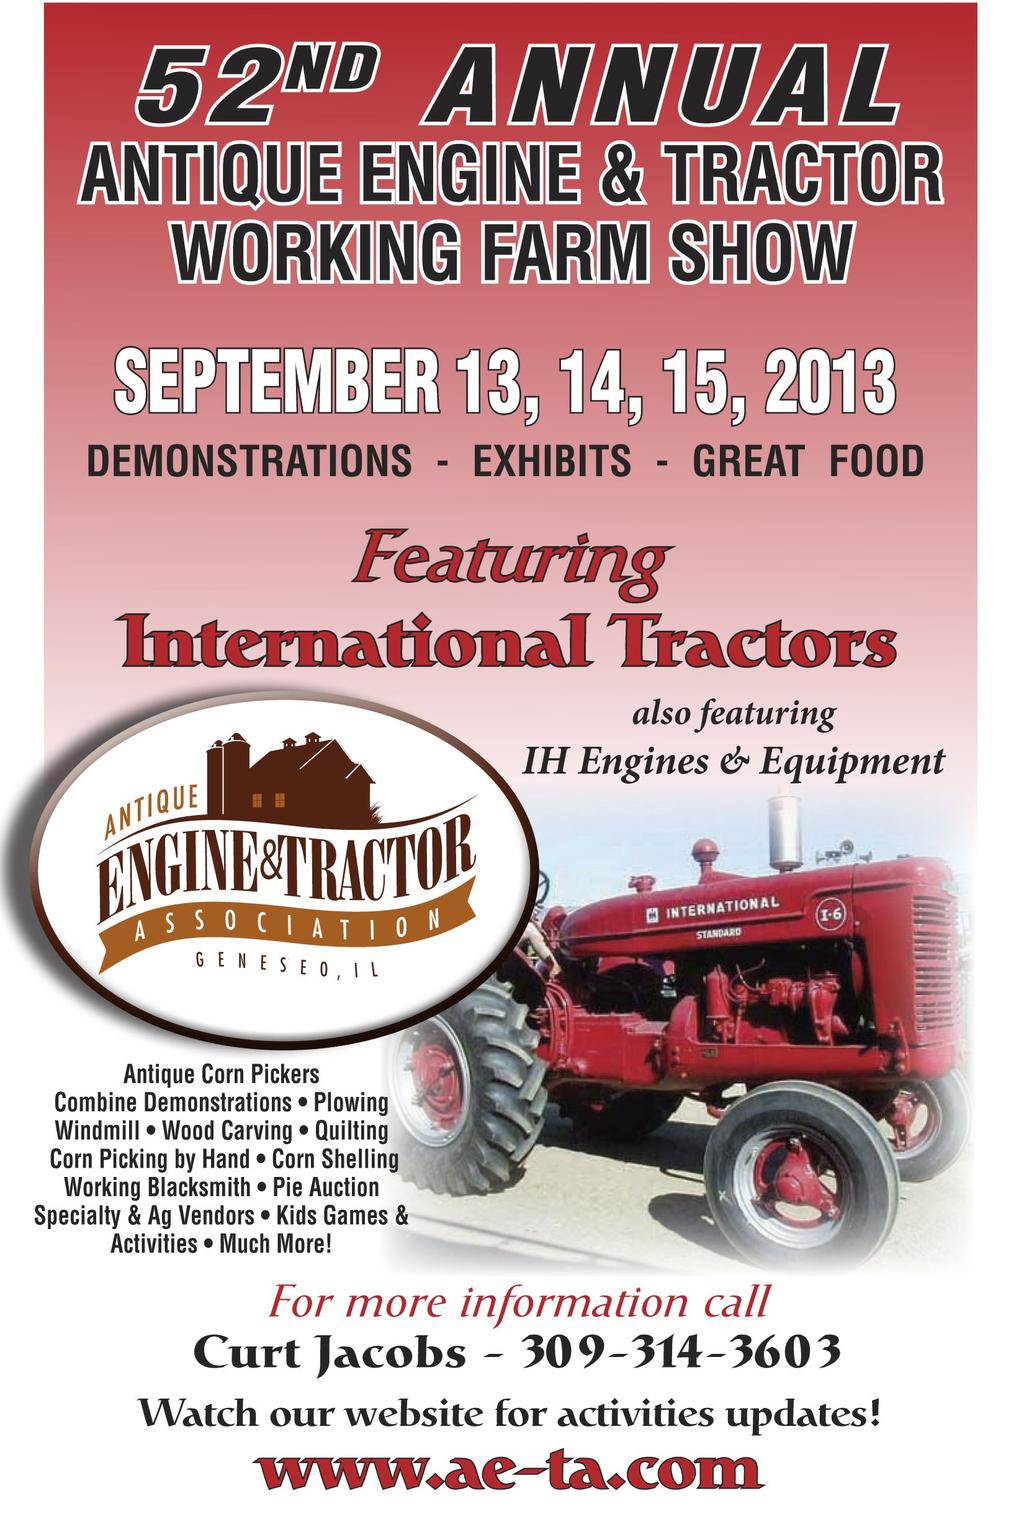 AETA 52 nd Annual Working Farm Show 2013 SYSTEM OF CONTROL FOR SHOW OPERATIONS Show Director: Mark Johnston Feature Coordinator: Lenzy Stickler & John Boyens Vendors (non-food): Skip Farnam Vendors